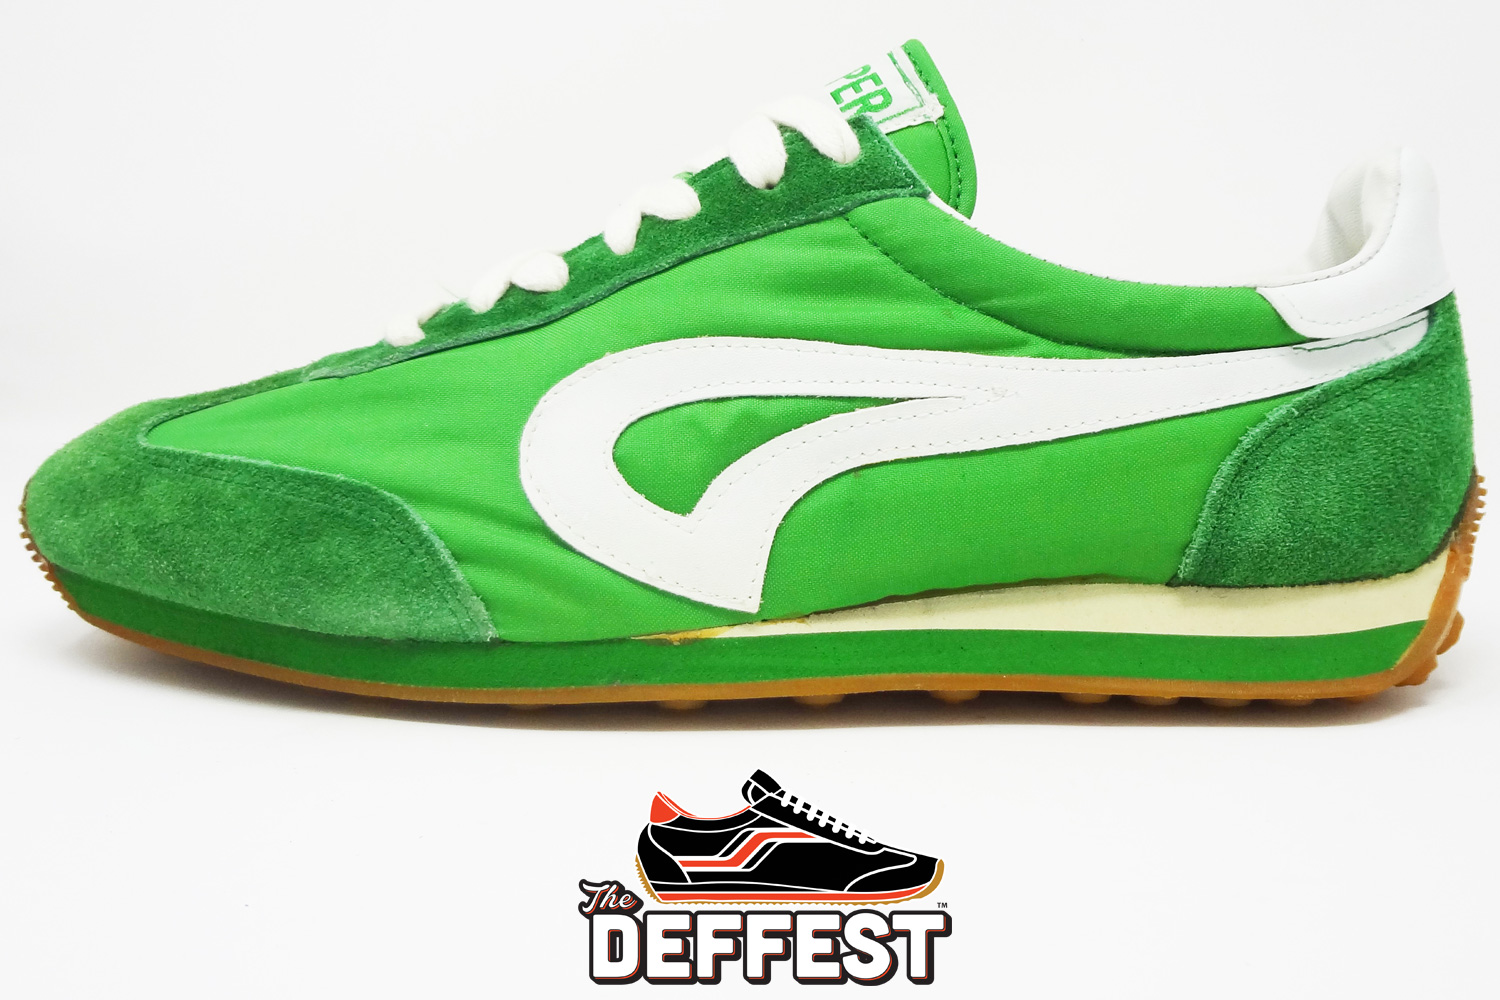 SUPER brand vintage sneakers profile view @ The Deffest